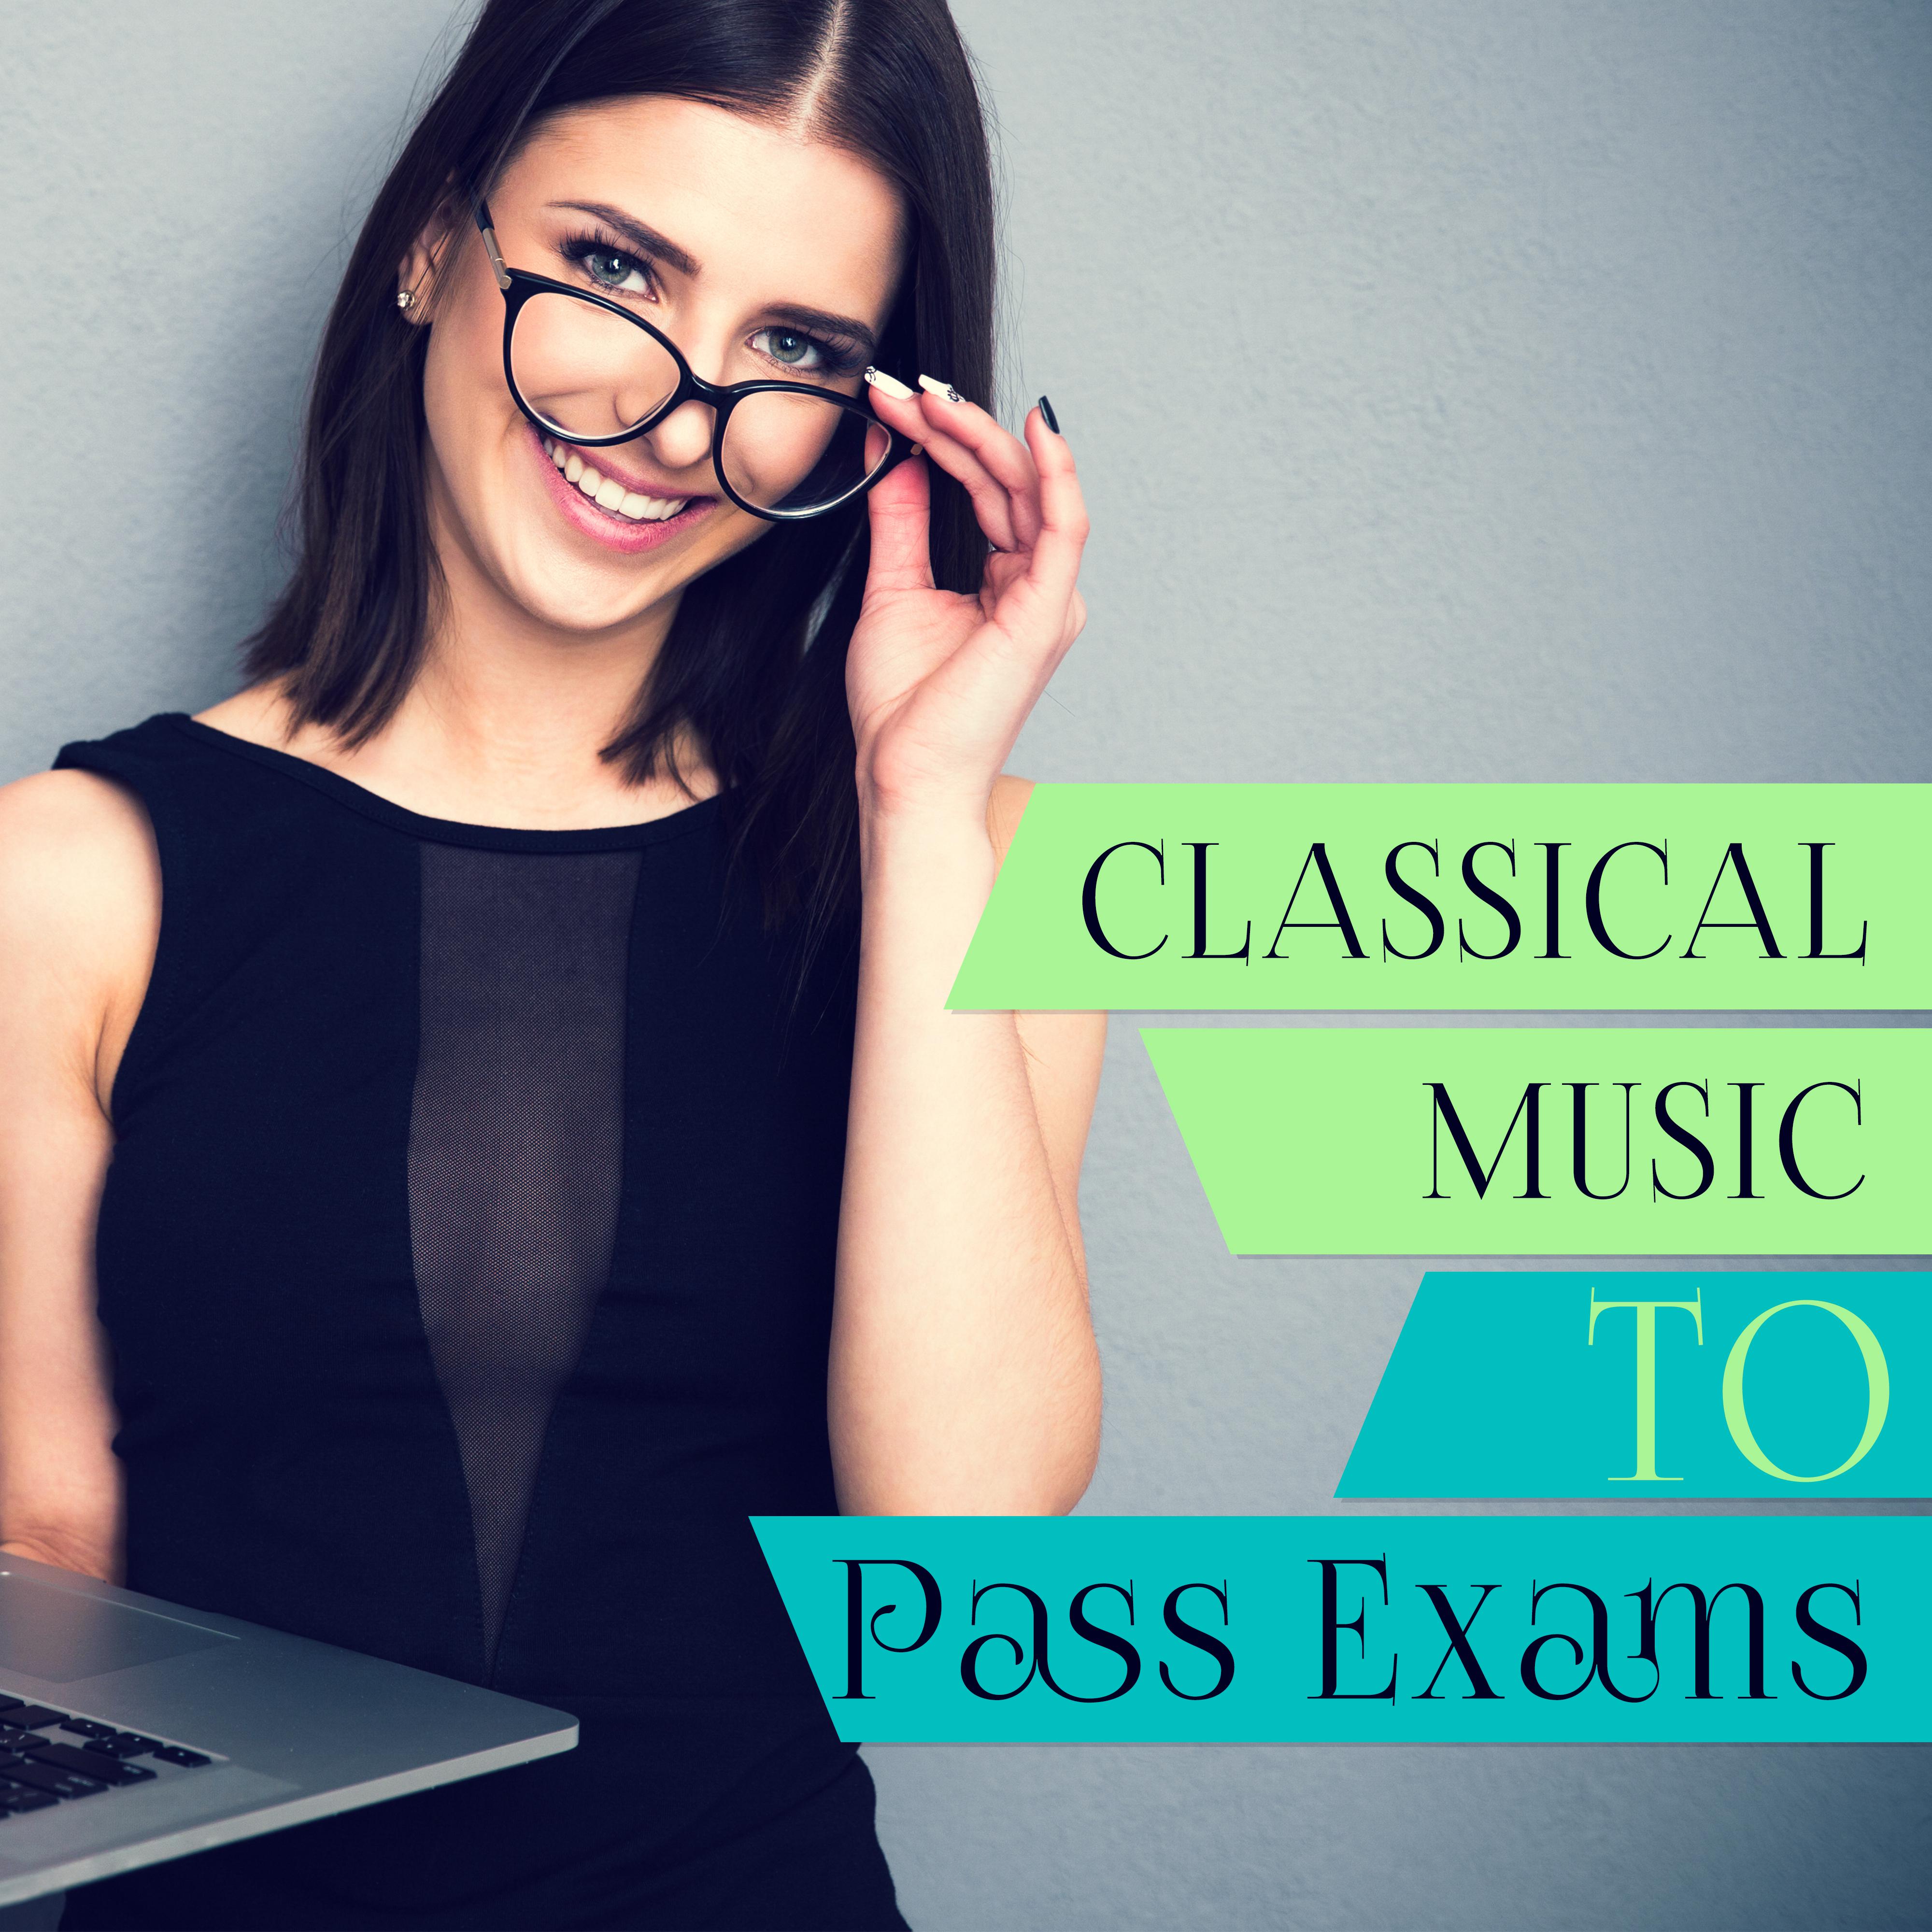 Classical Music to Pass Exams – Soft Classics Songs, Focus on Task with Mozart, Piano Relaxation